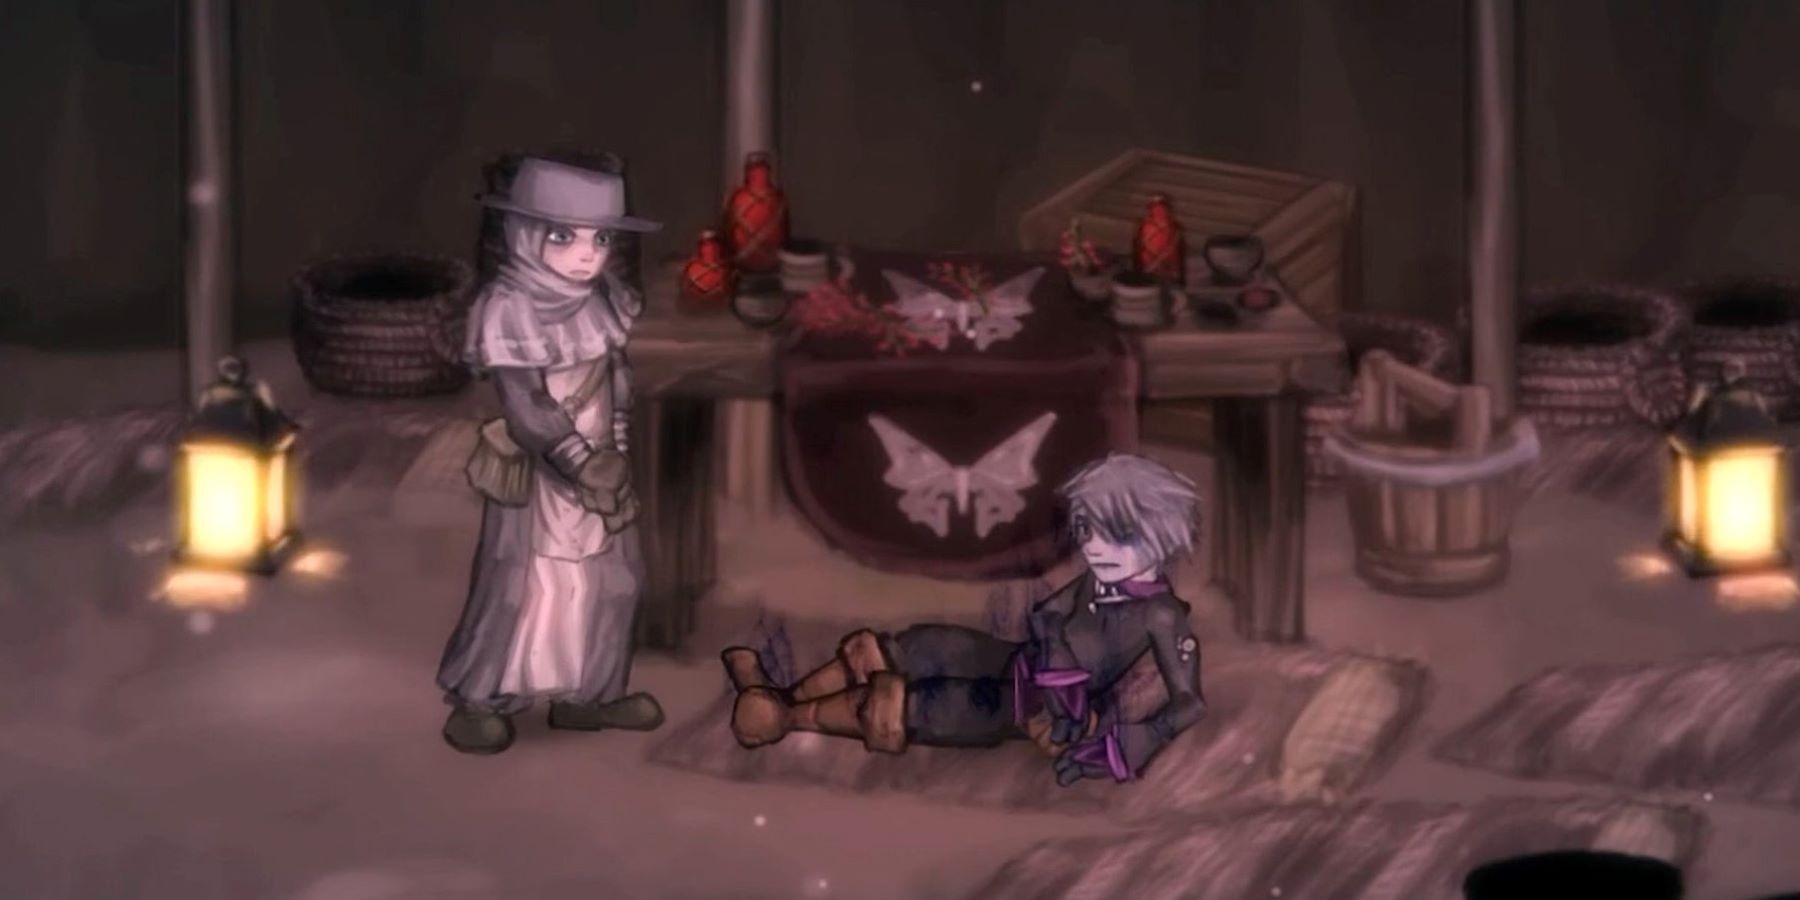 A player character in Salt and Sacrifice waking up in a camp with a cleric NPC looking over them